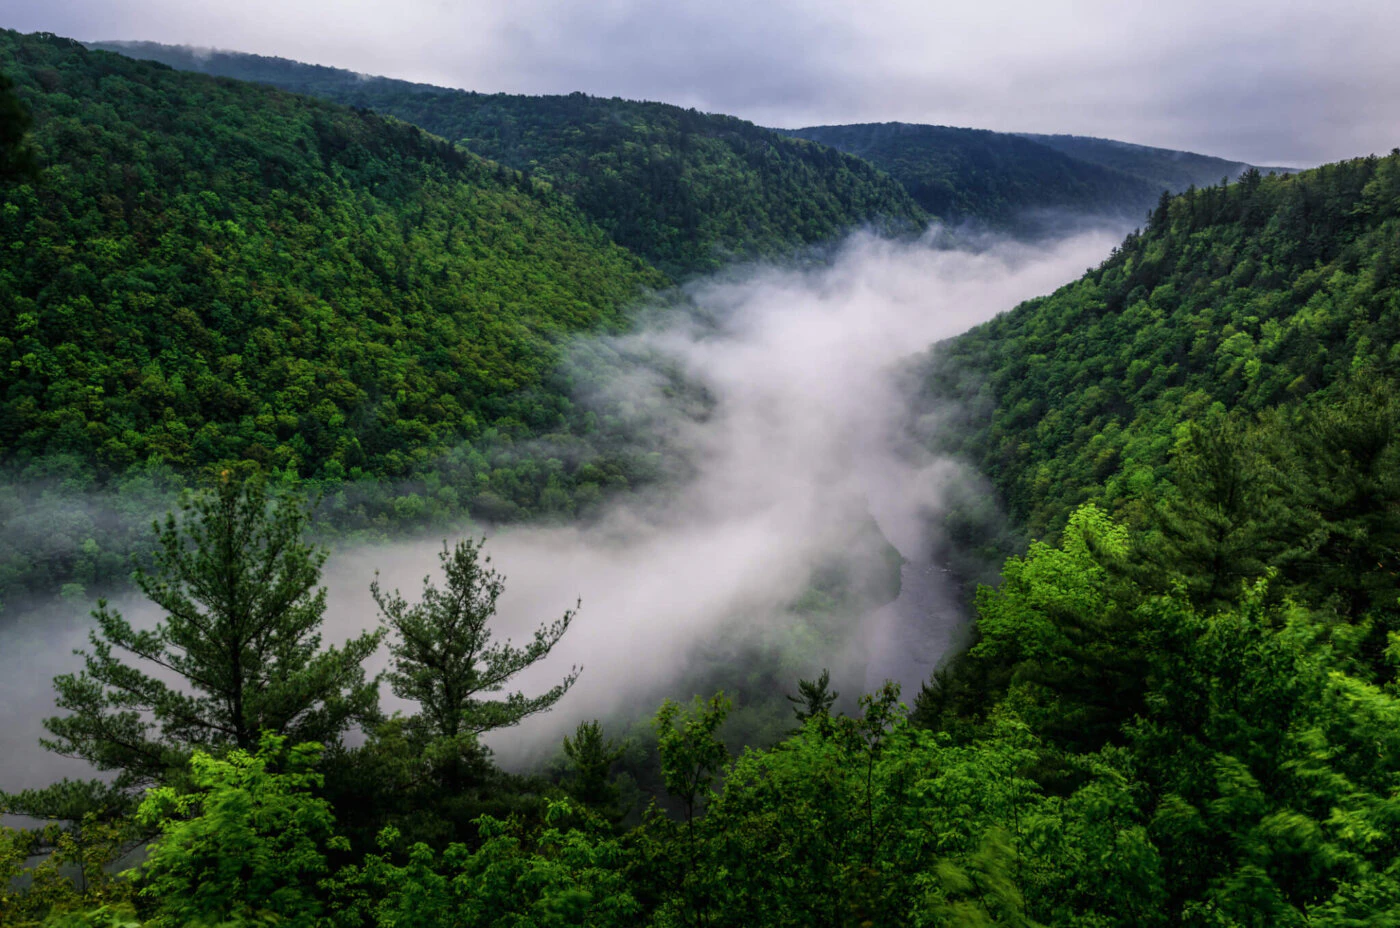 Morning fog in the valley of Pine Creek in Colton Point state park. The deepest point of the canyon is 1,450 feet (440 m), and is known as Grand Canyon of Pennsylvania.